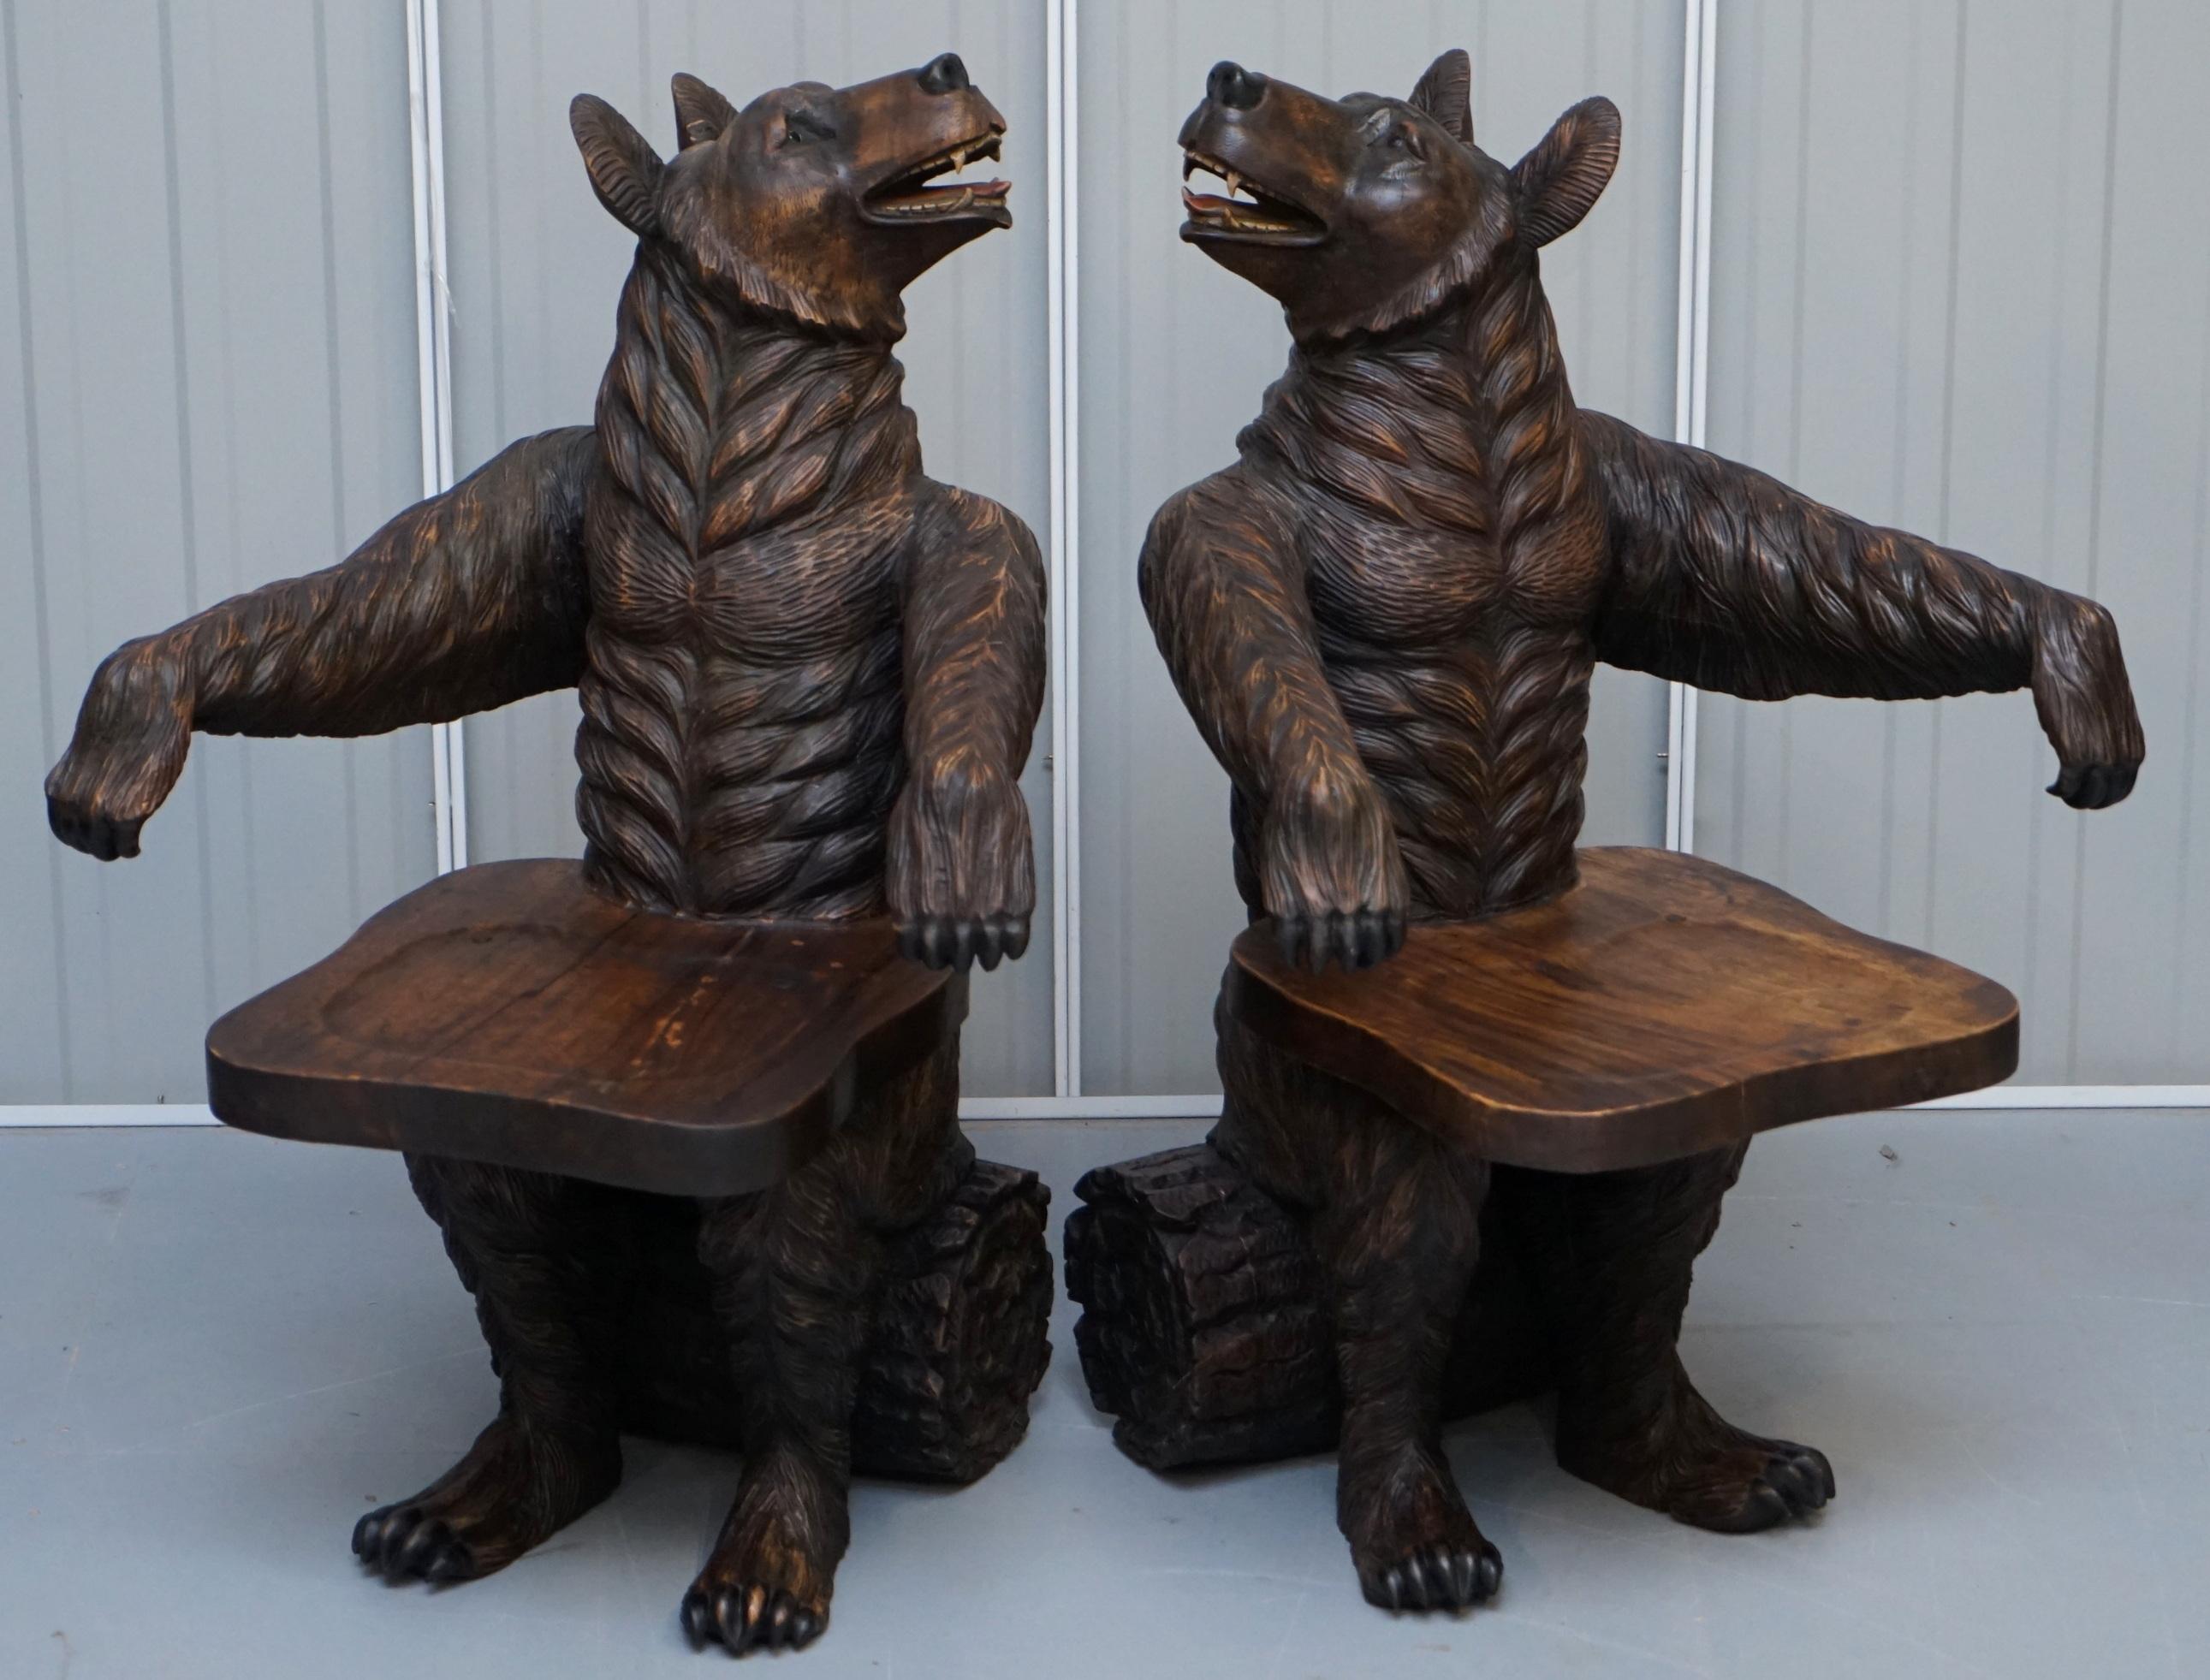 We are delighted to offer for sale this stunning and exceptionally rare pair of original hand carved in Black Forest wood very large Bear armchairs

A collectable and signature pair of art furniture armchairs. Black forest wood seating almost